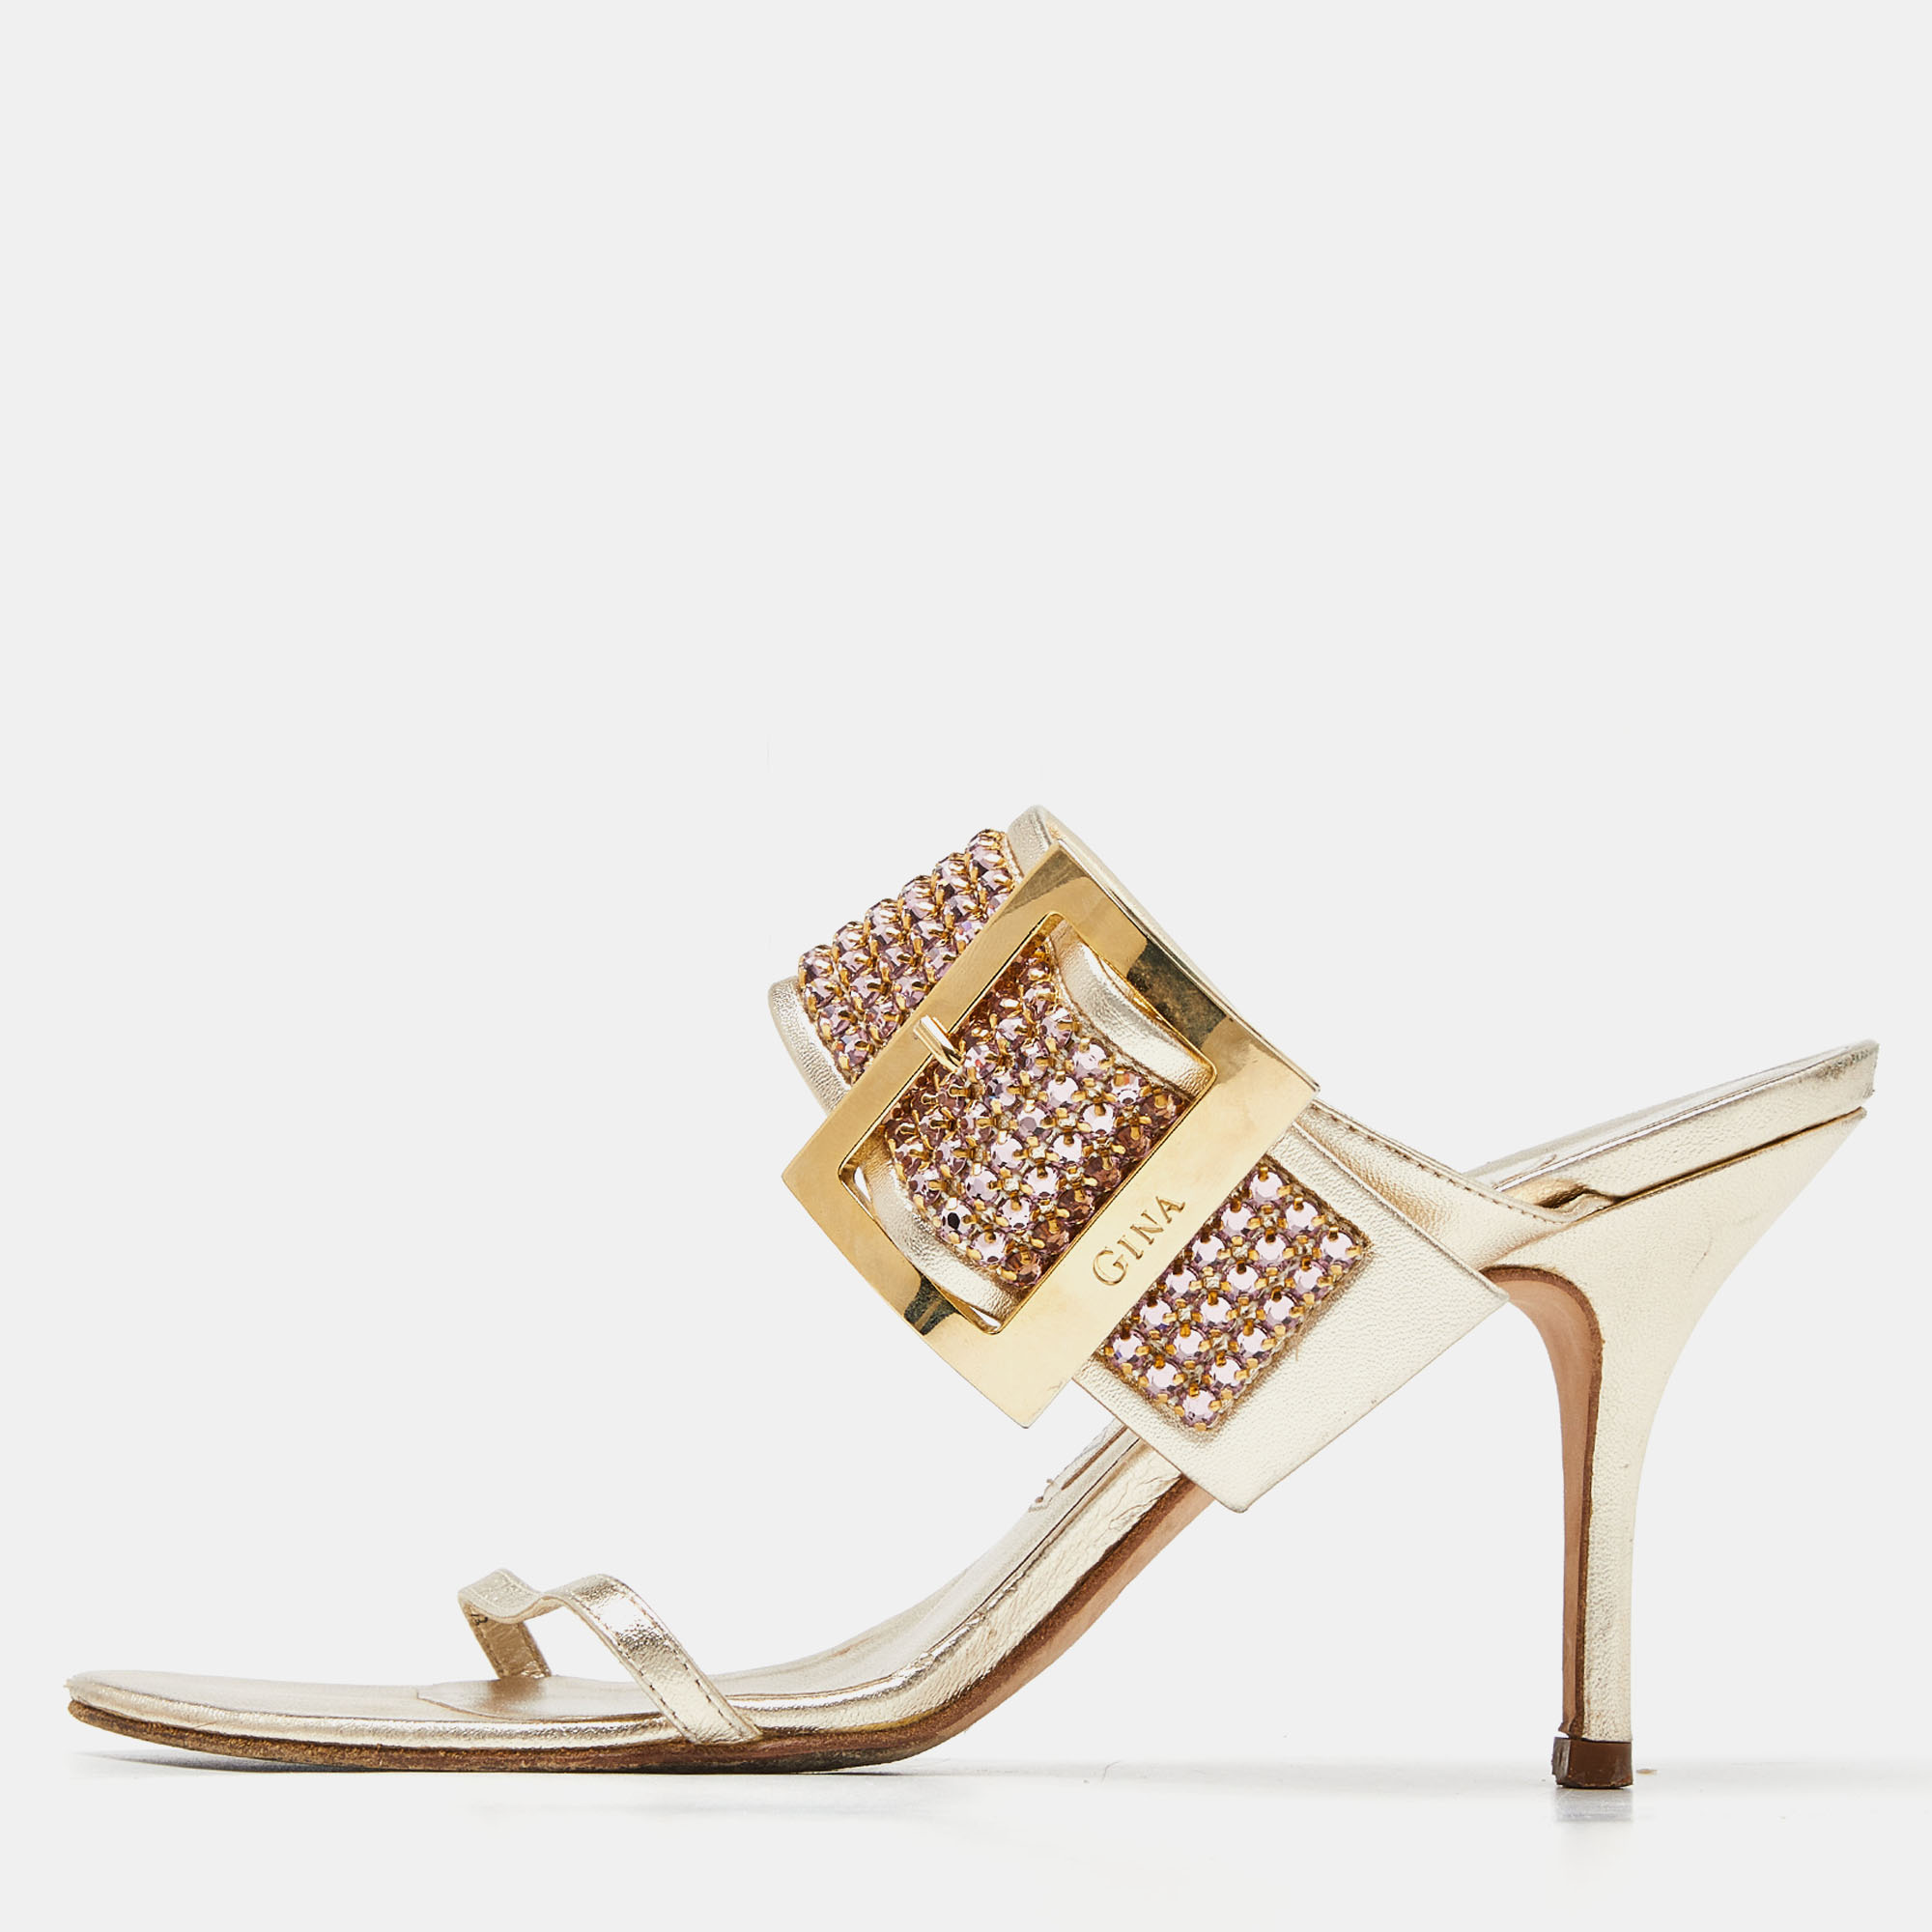 The fashion house's tradition of excellence coupled with modern design sensibilities works to make these Gina sandals a fabulous choice. Theyll help you deliver a chic look with ease.